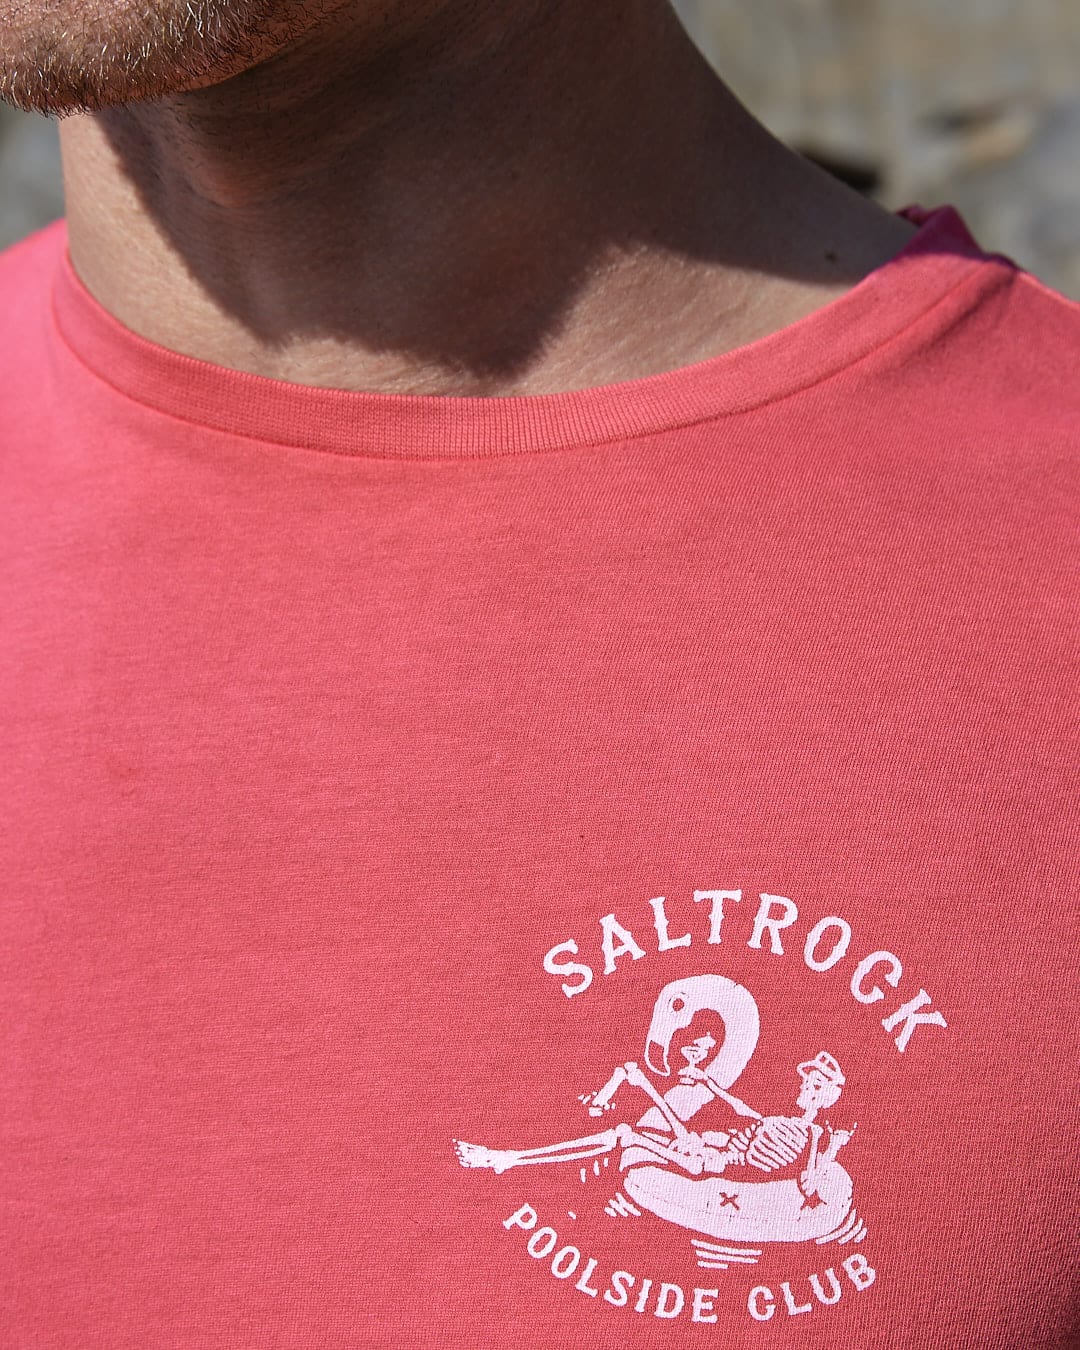 A man wearing a red t-shirt with the Saltrock brand logo on it.